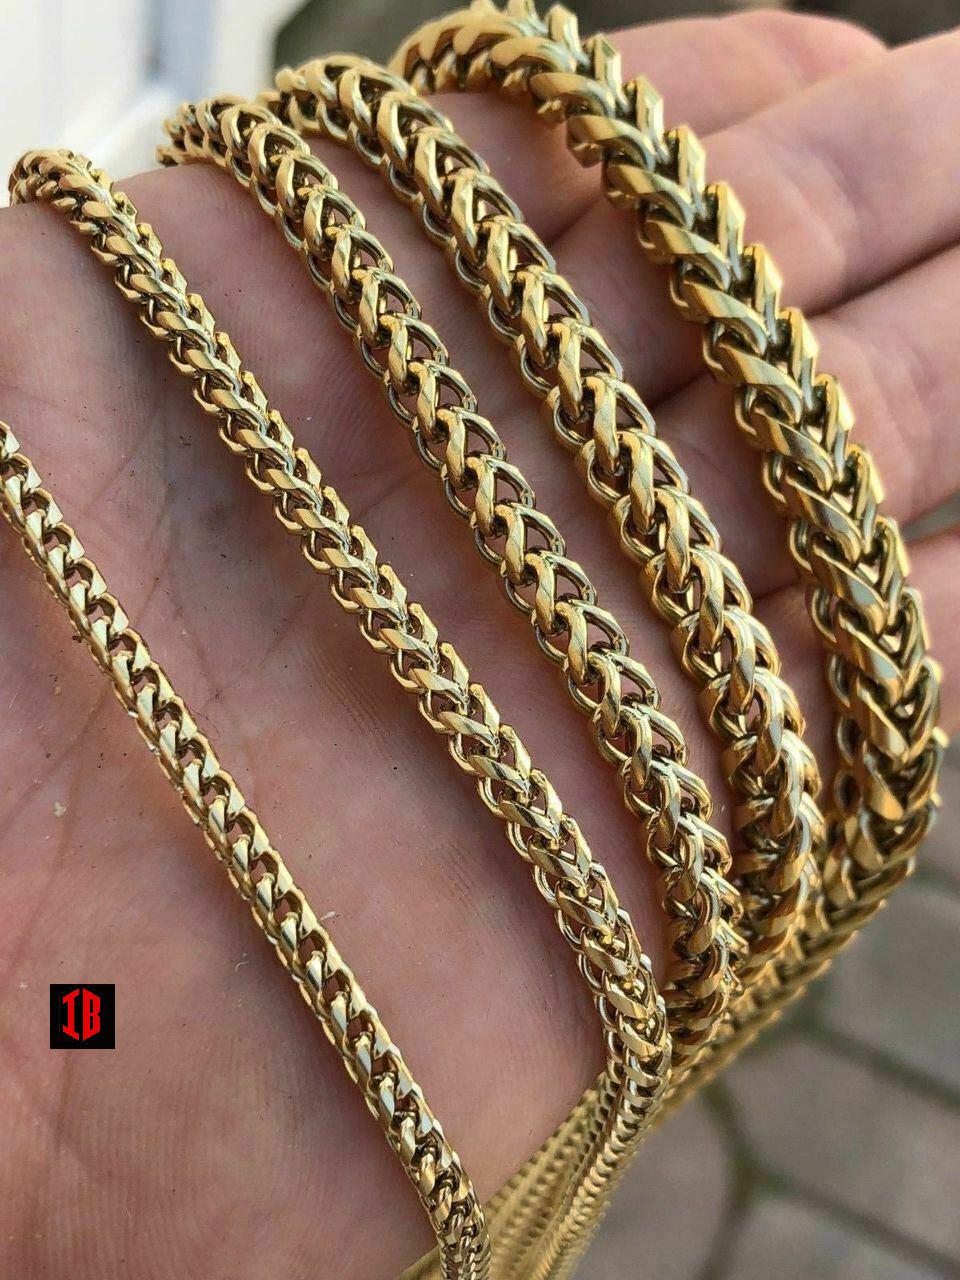 14K YELLOW GOLD Men's Franco Chain 14k Gold Plated Stainless Steel BEST QUALITY! 3-8mm HEAVY!